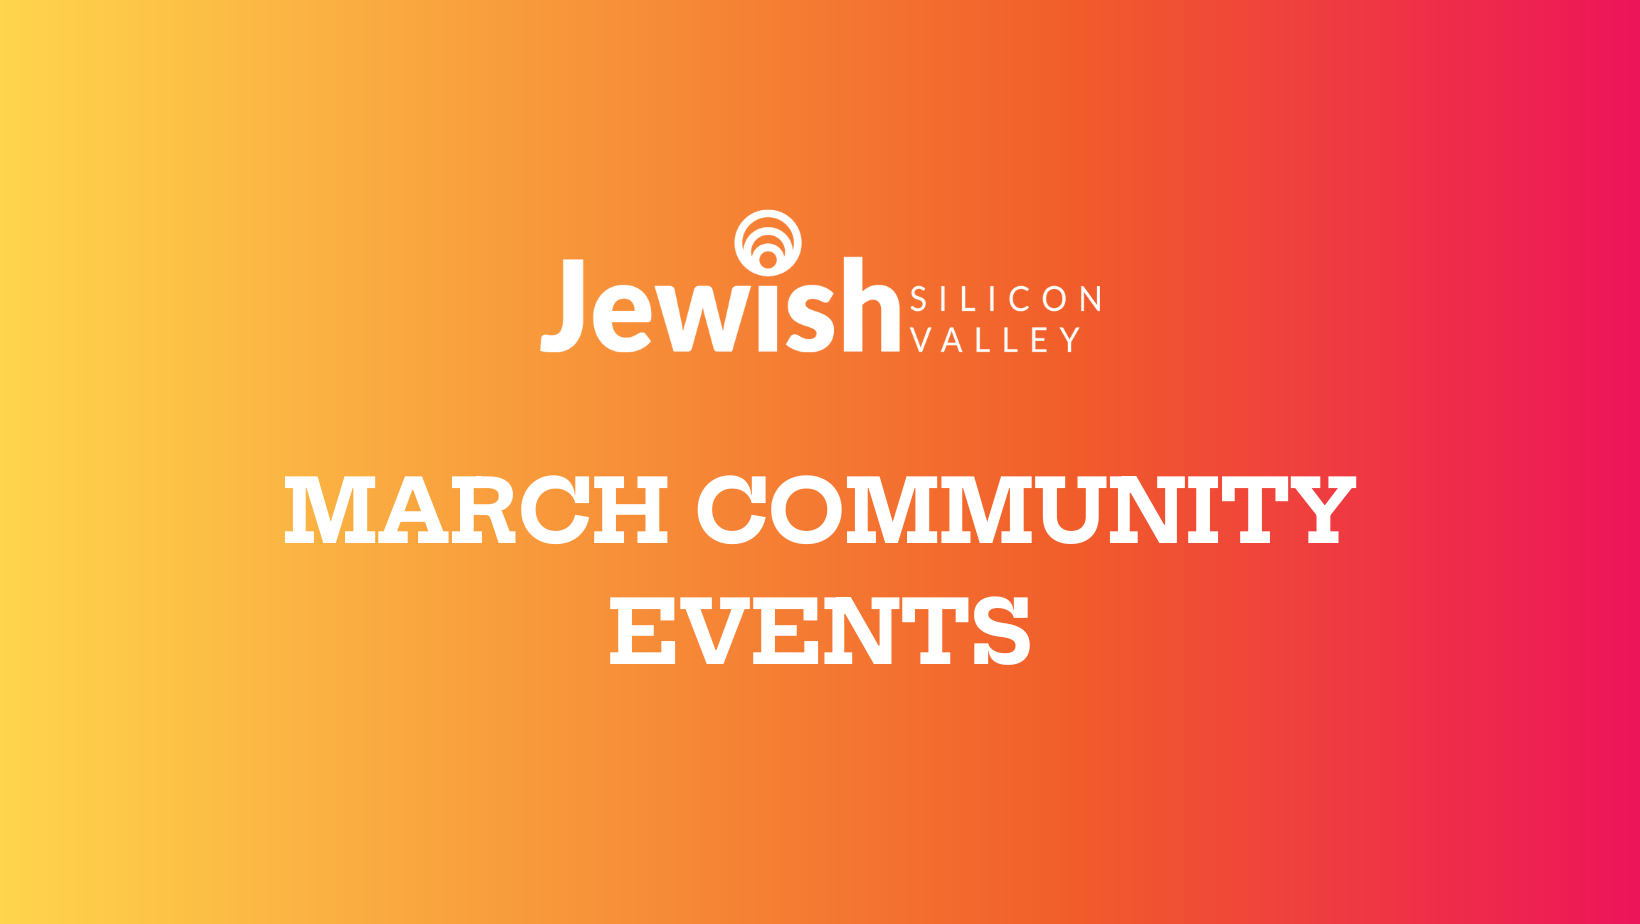 March Community Events Jewish Silicon Valley